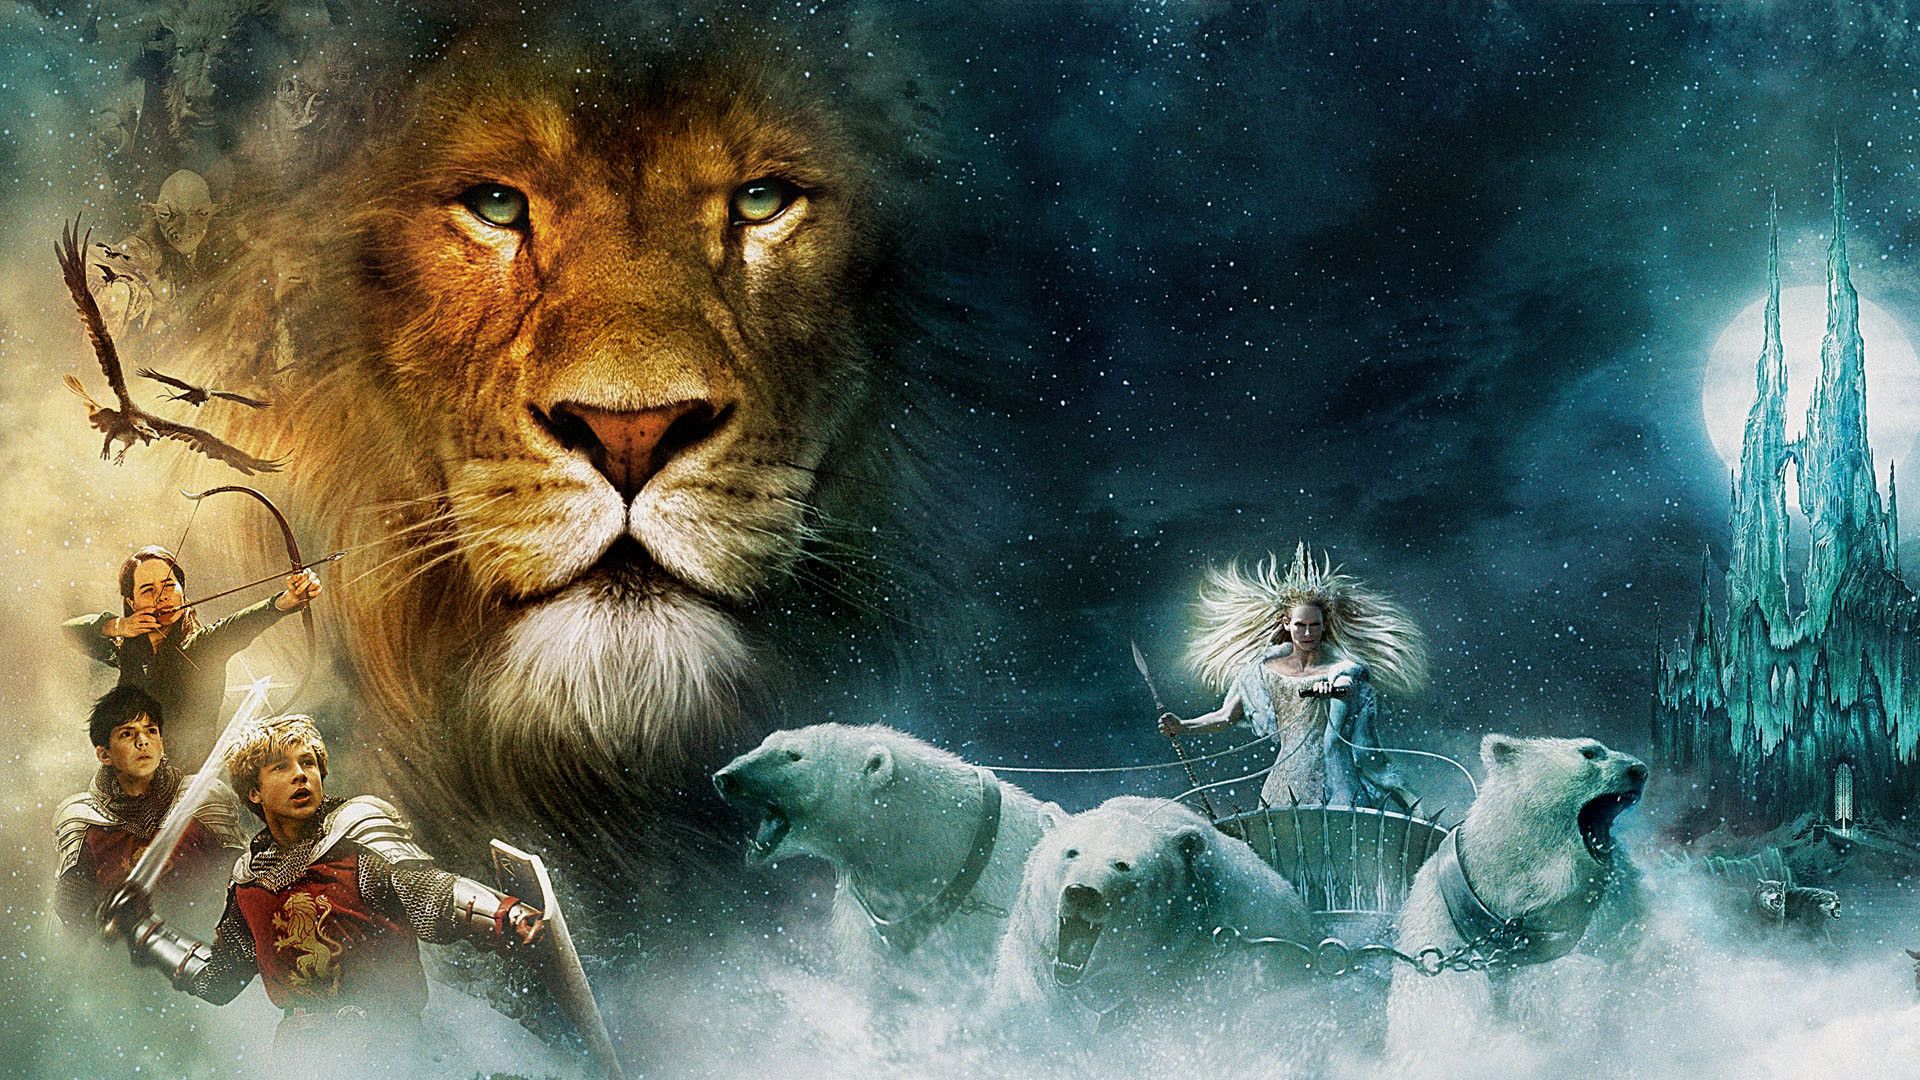 The Chronicles of Narnia: The Lion, the Witch and the Wardrobe background